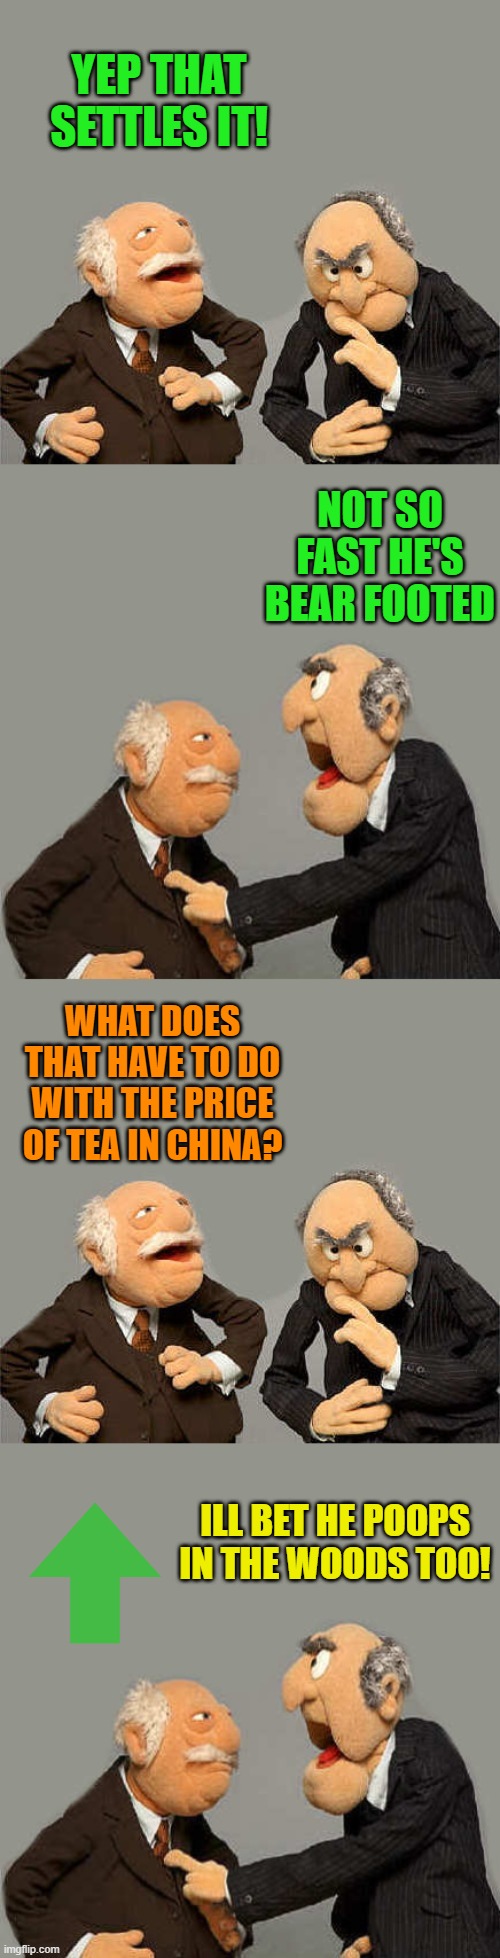 YEP THAT SETTLES IT! NOT SO FAST HE'S BEAR FOOTED WHAT DOES THAT HAVE TO DO WITH THE PRICE OF TEA IN CHINA? ILL BET HE POOPS IN THE WOODS TO | image tagged in the meme with no name | made w/ Imgflip meme maker